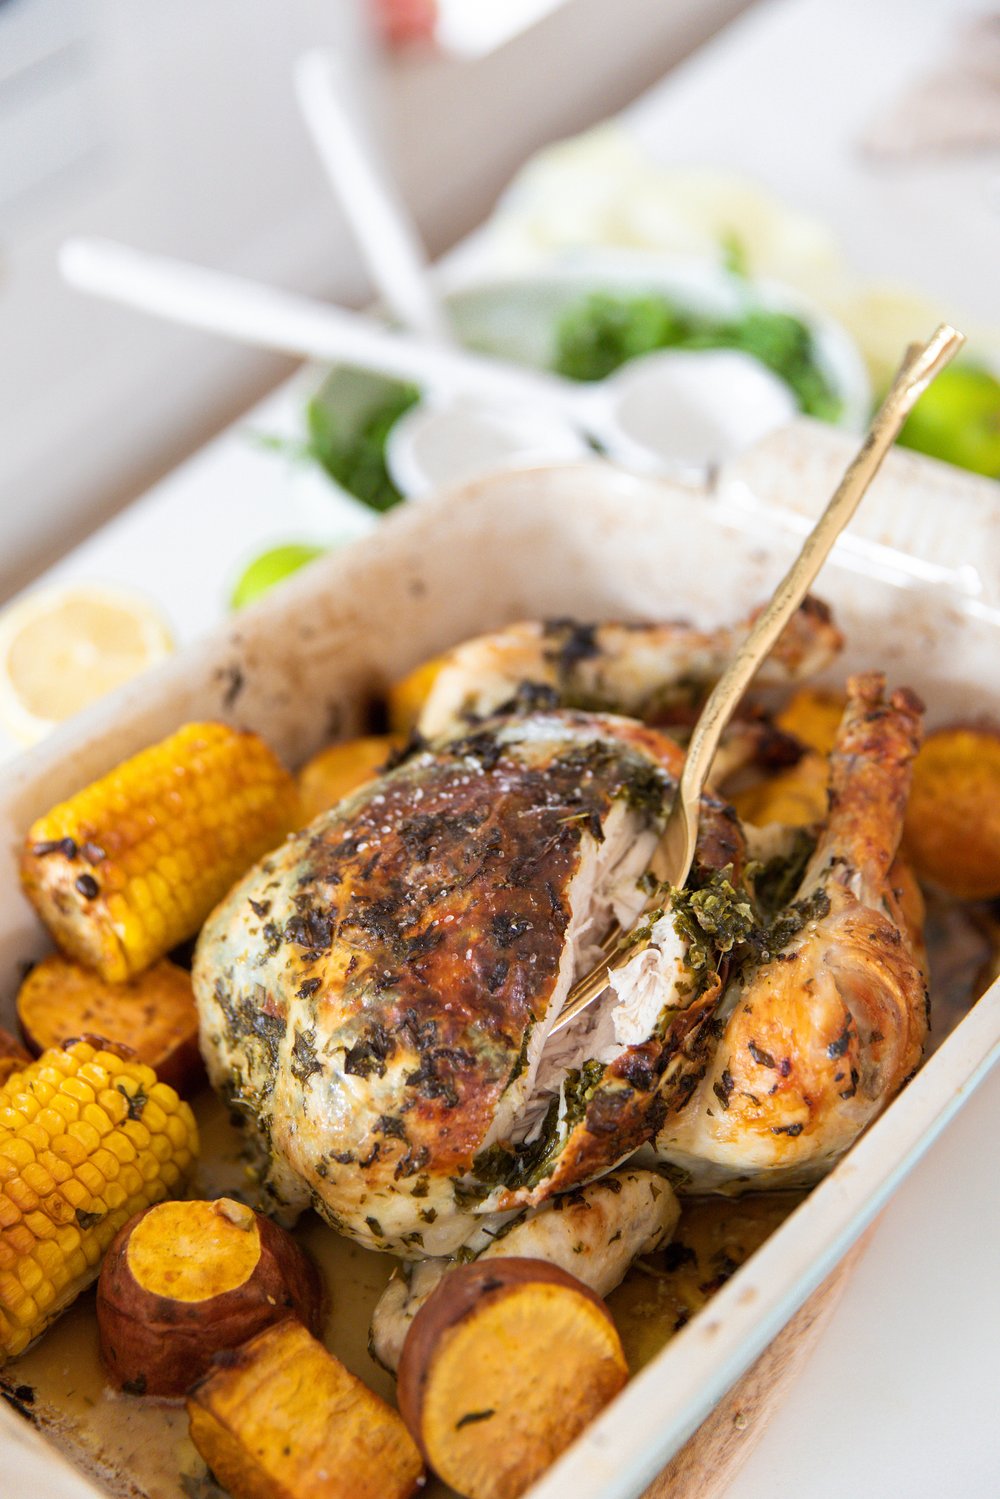 Lemon & Herb Whole Baked Chicken